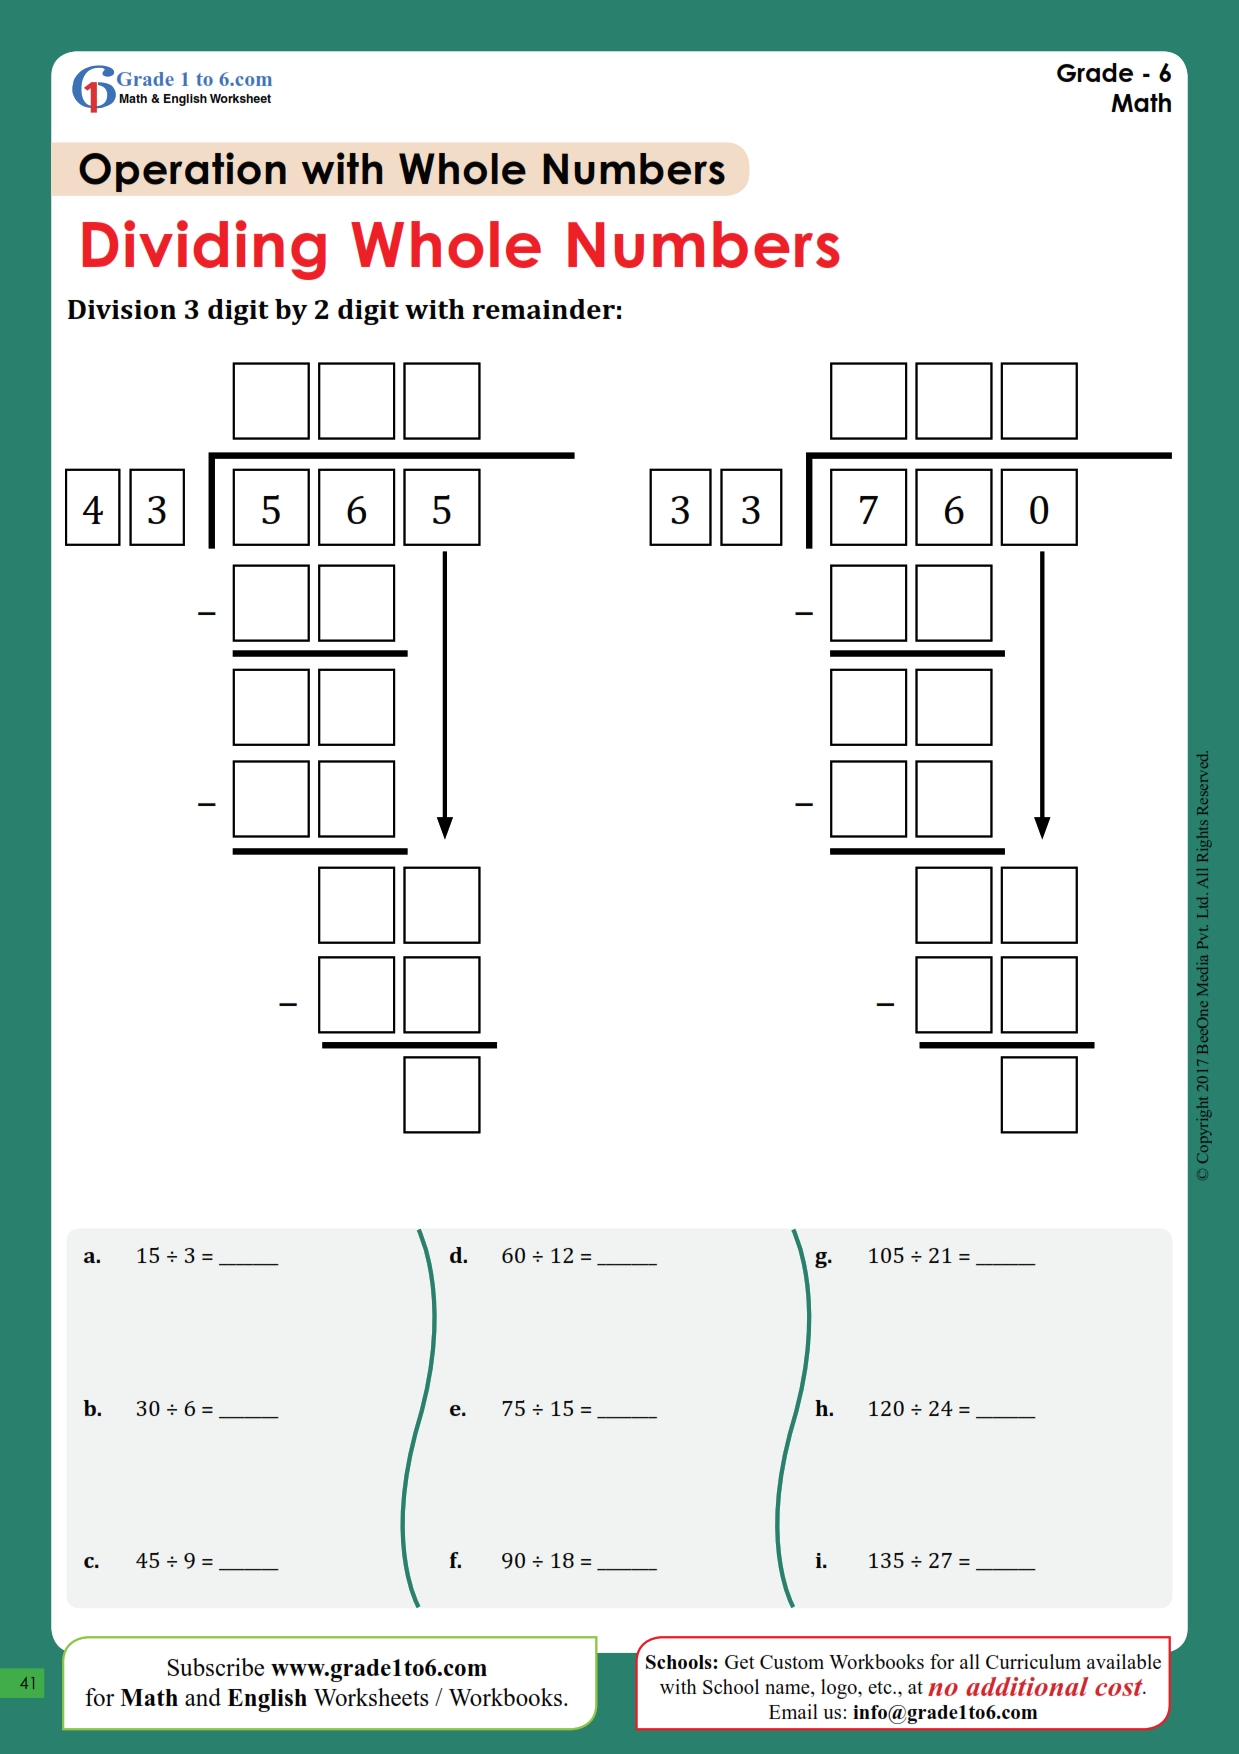 worksheets-multiplying-fractions-by-whole-numbers-missing-factors-k5